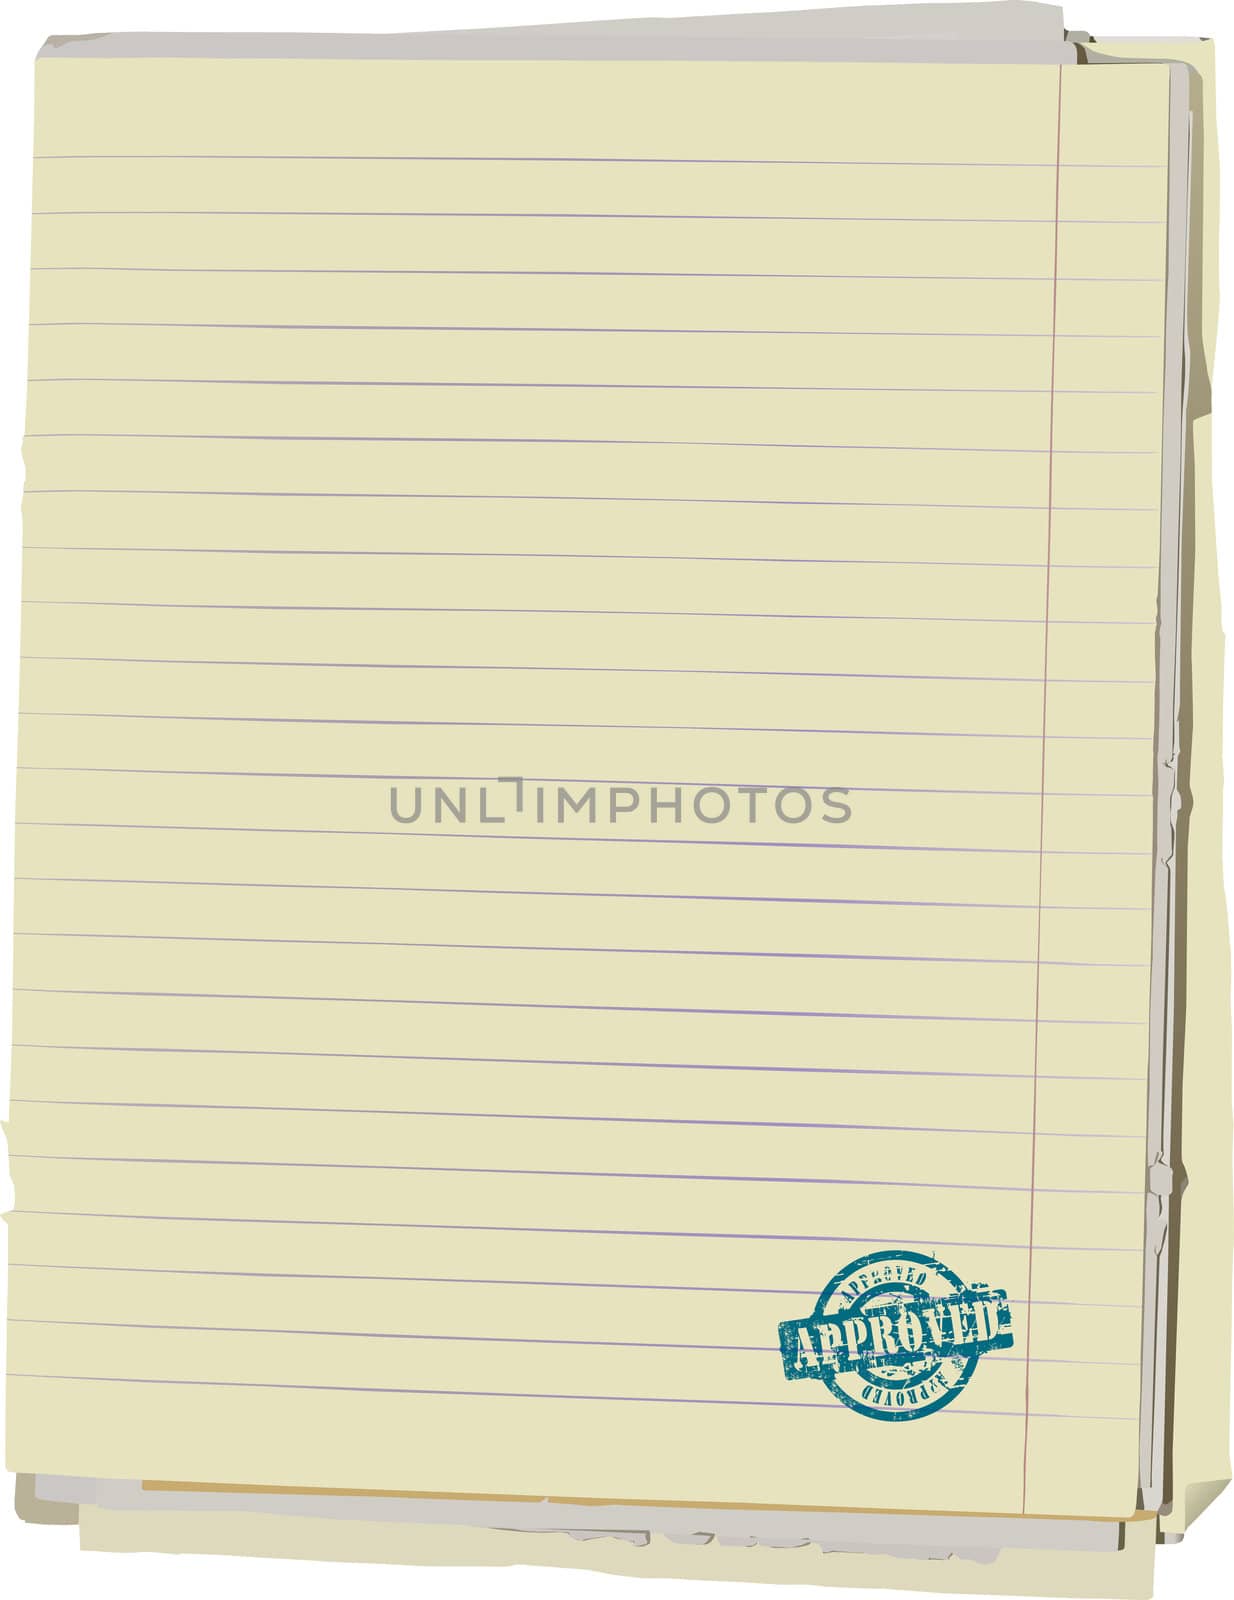 Stack of old lined papers from note book and rubber stamp. Clipping path included to easy remove object shadow or replace background.